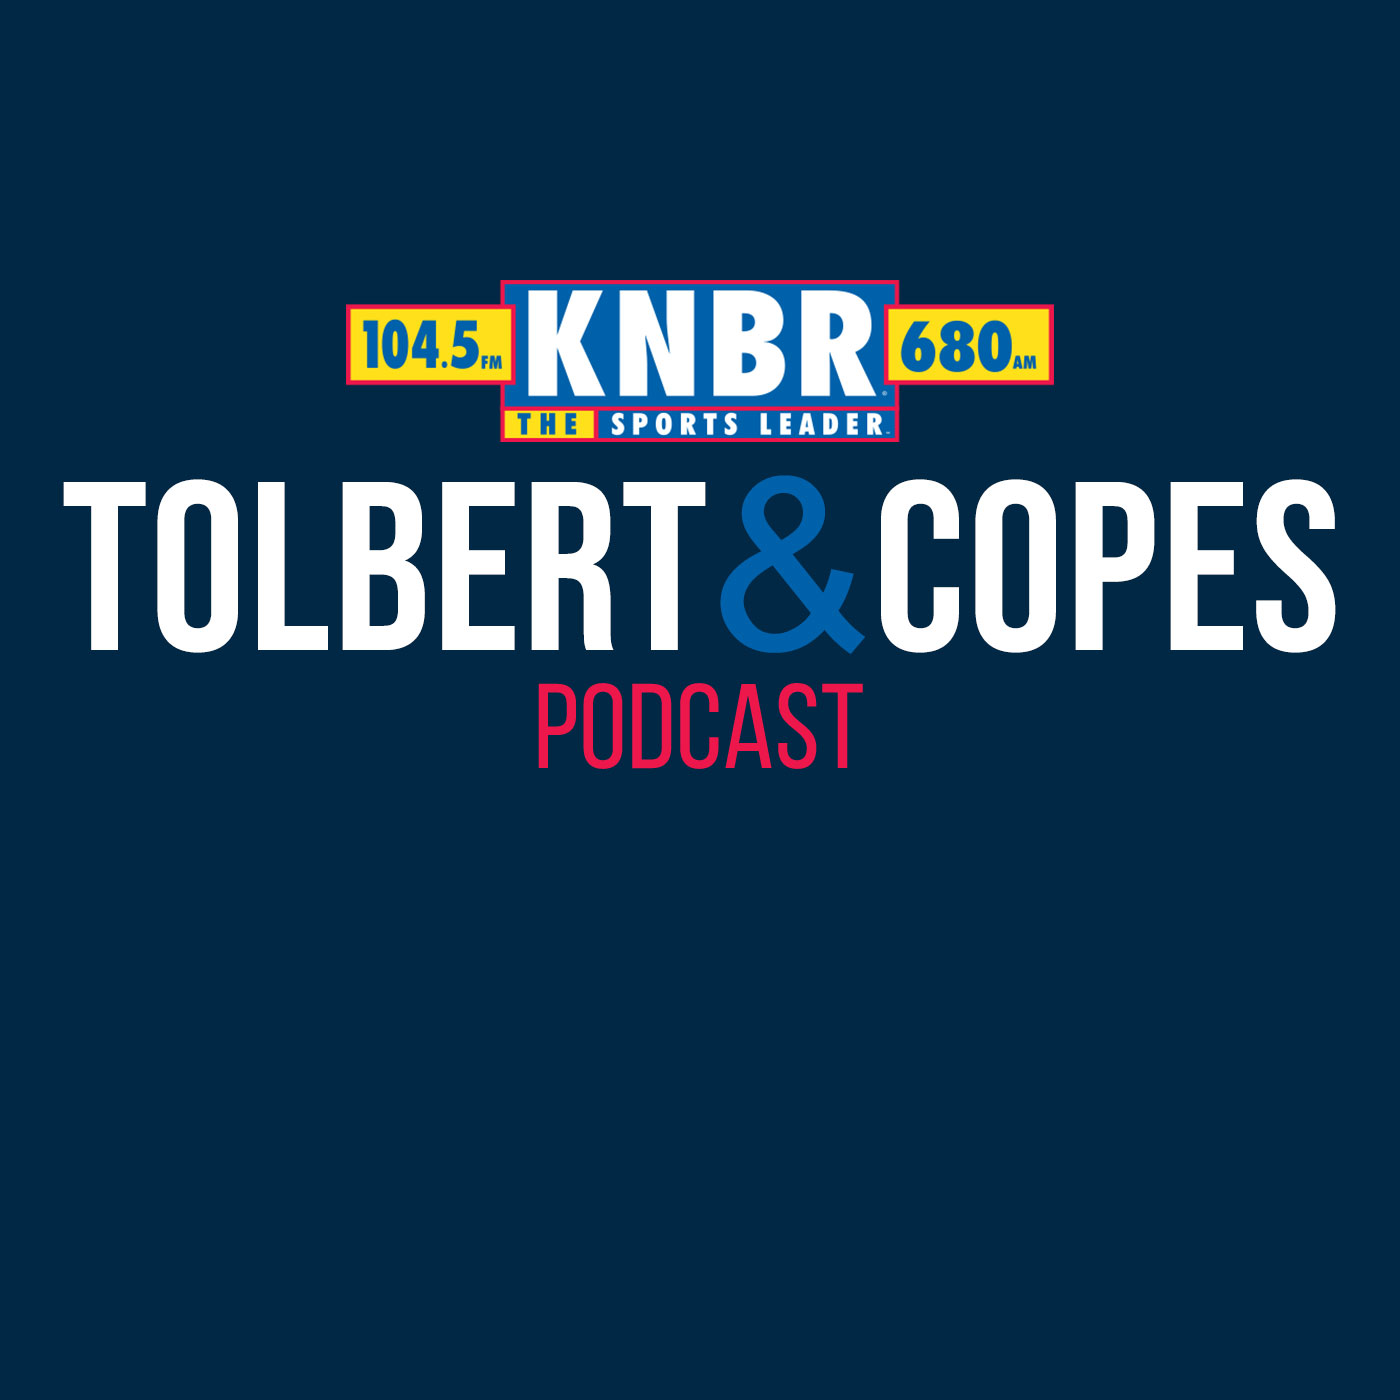 6-16 Eric Byrnes joins Tolbert & Copes to discuss if the Giants can keep pace with the Dodgers & Padres